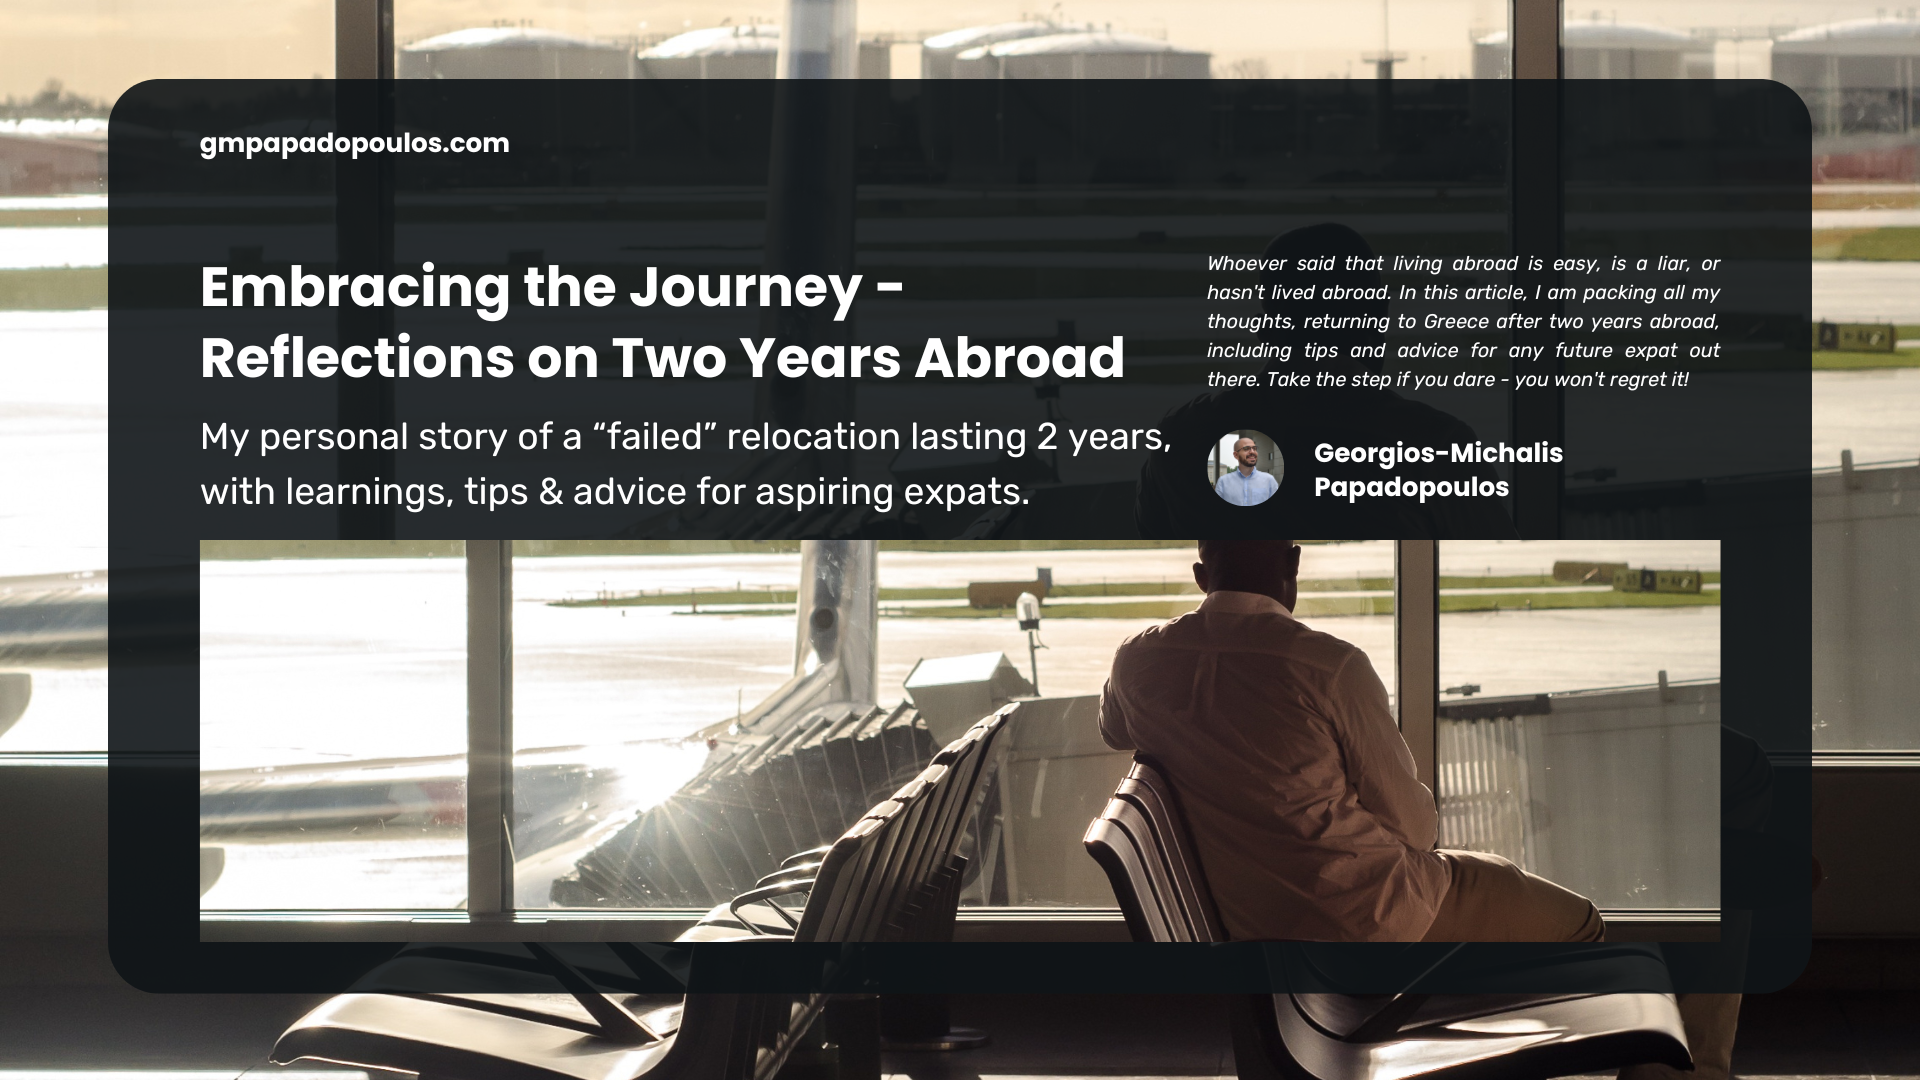 Embracing the Journey - Reflections on Two Years Abroad, with tips for aspiring expats